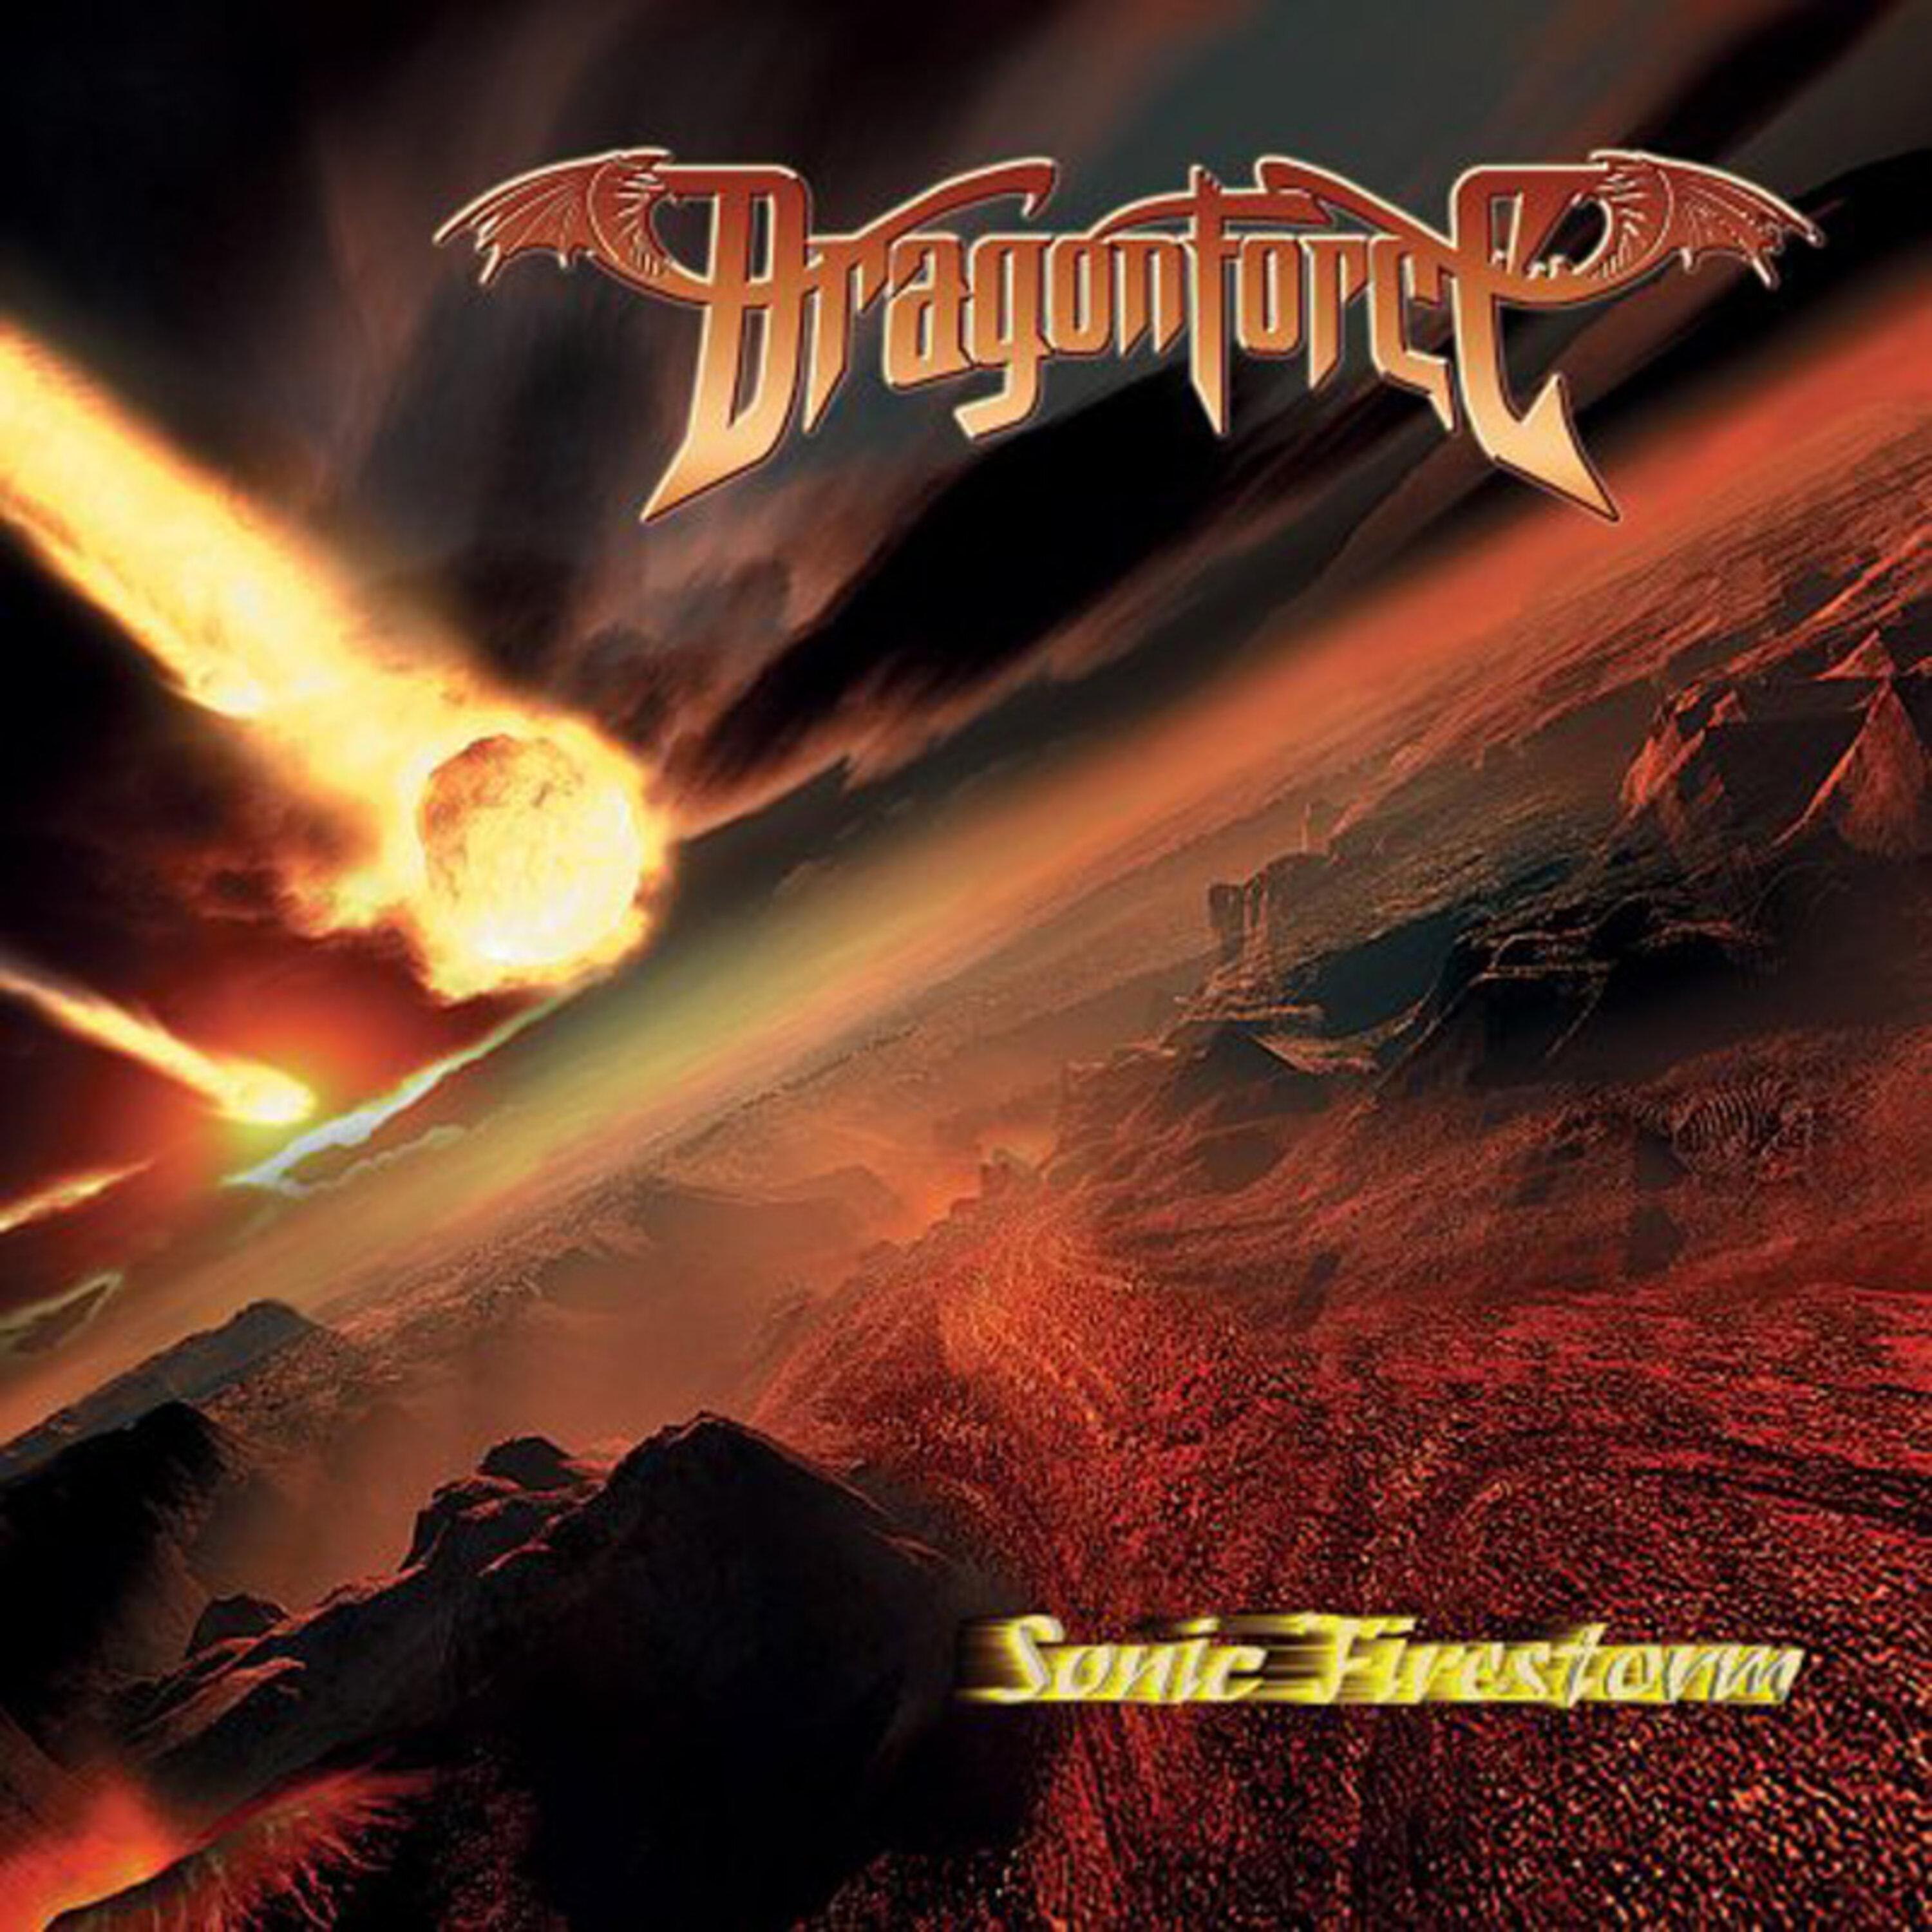 Dragonforce - Fury of the Storm